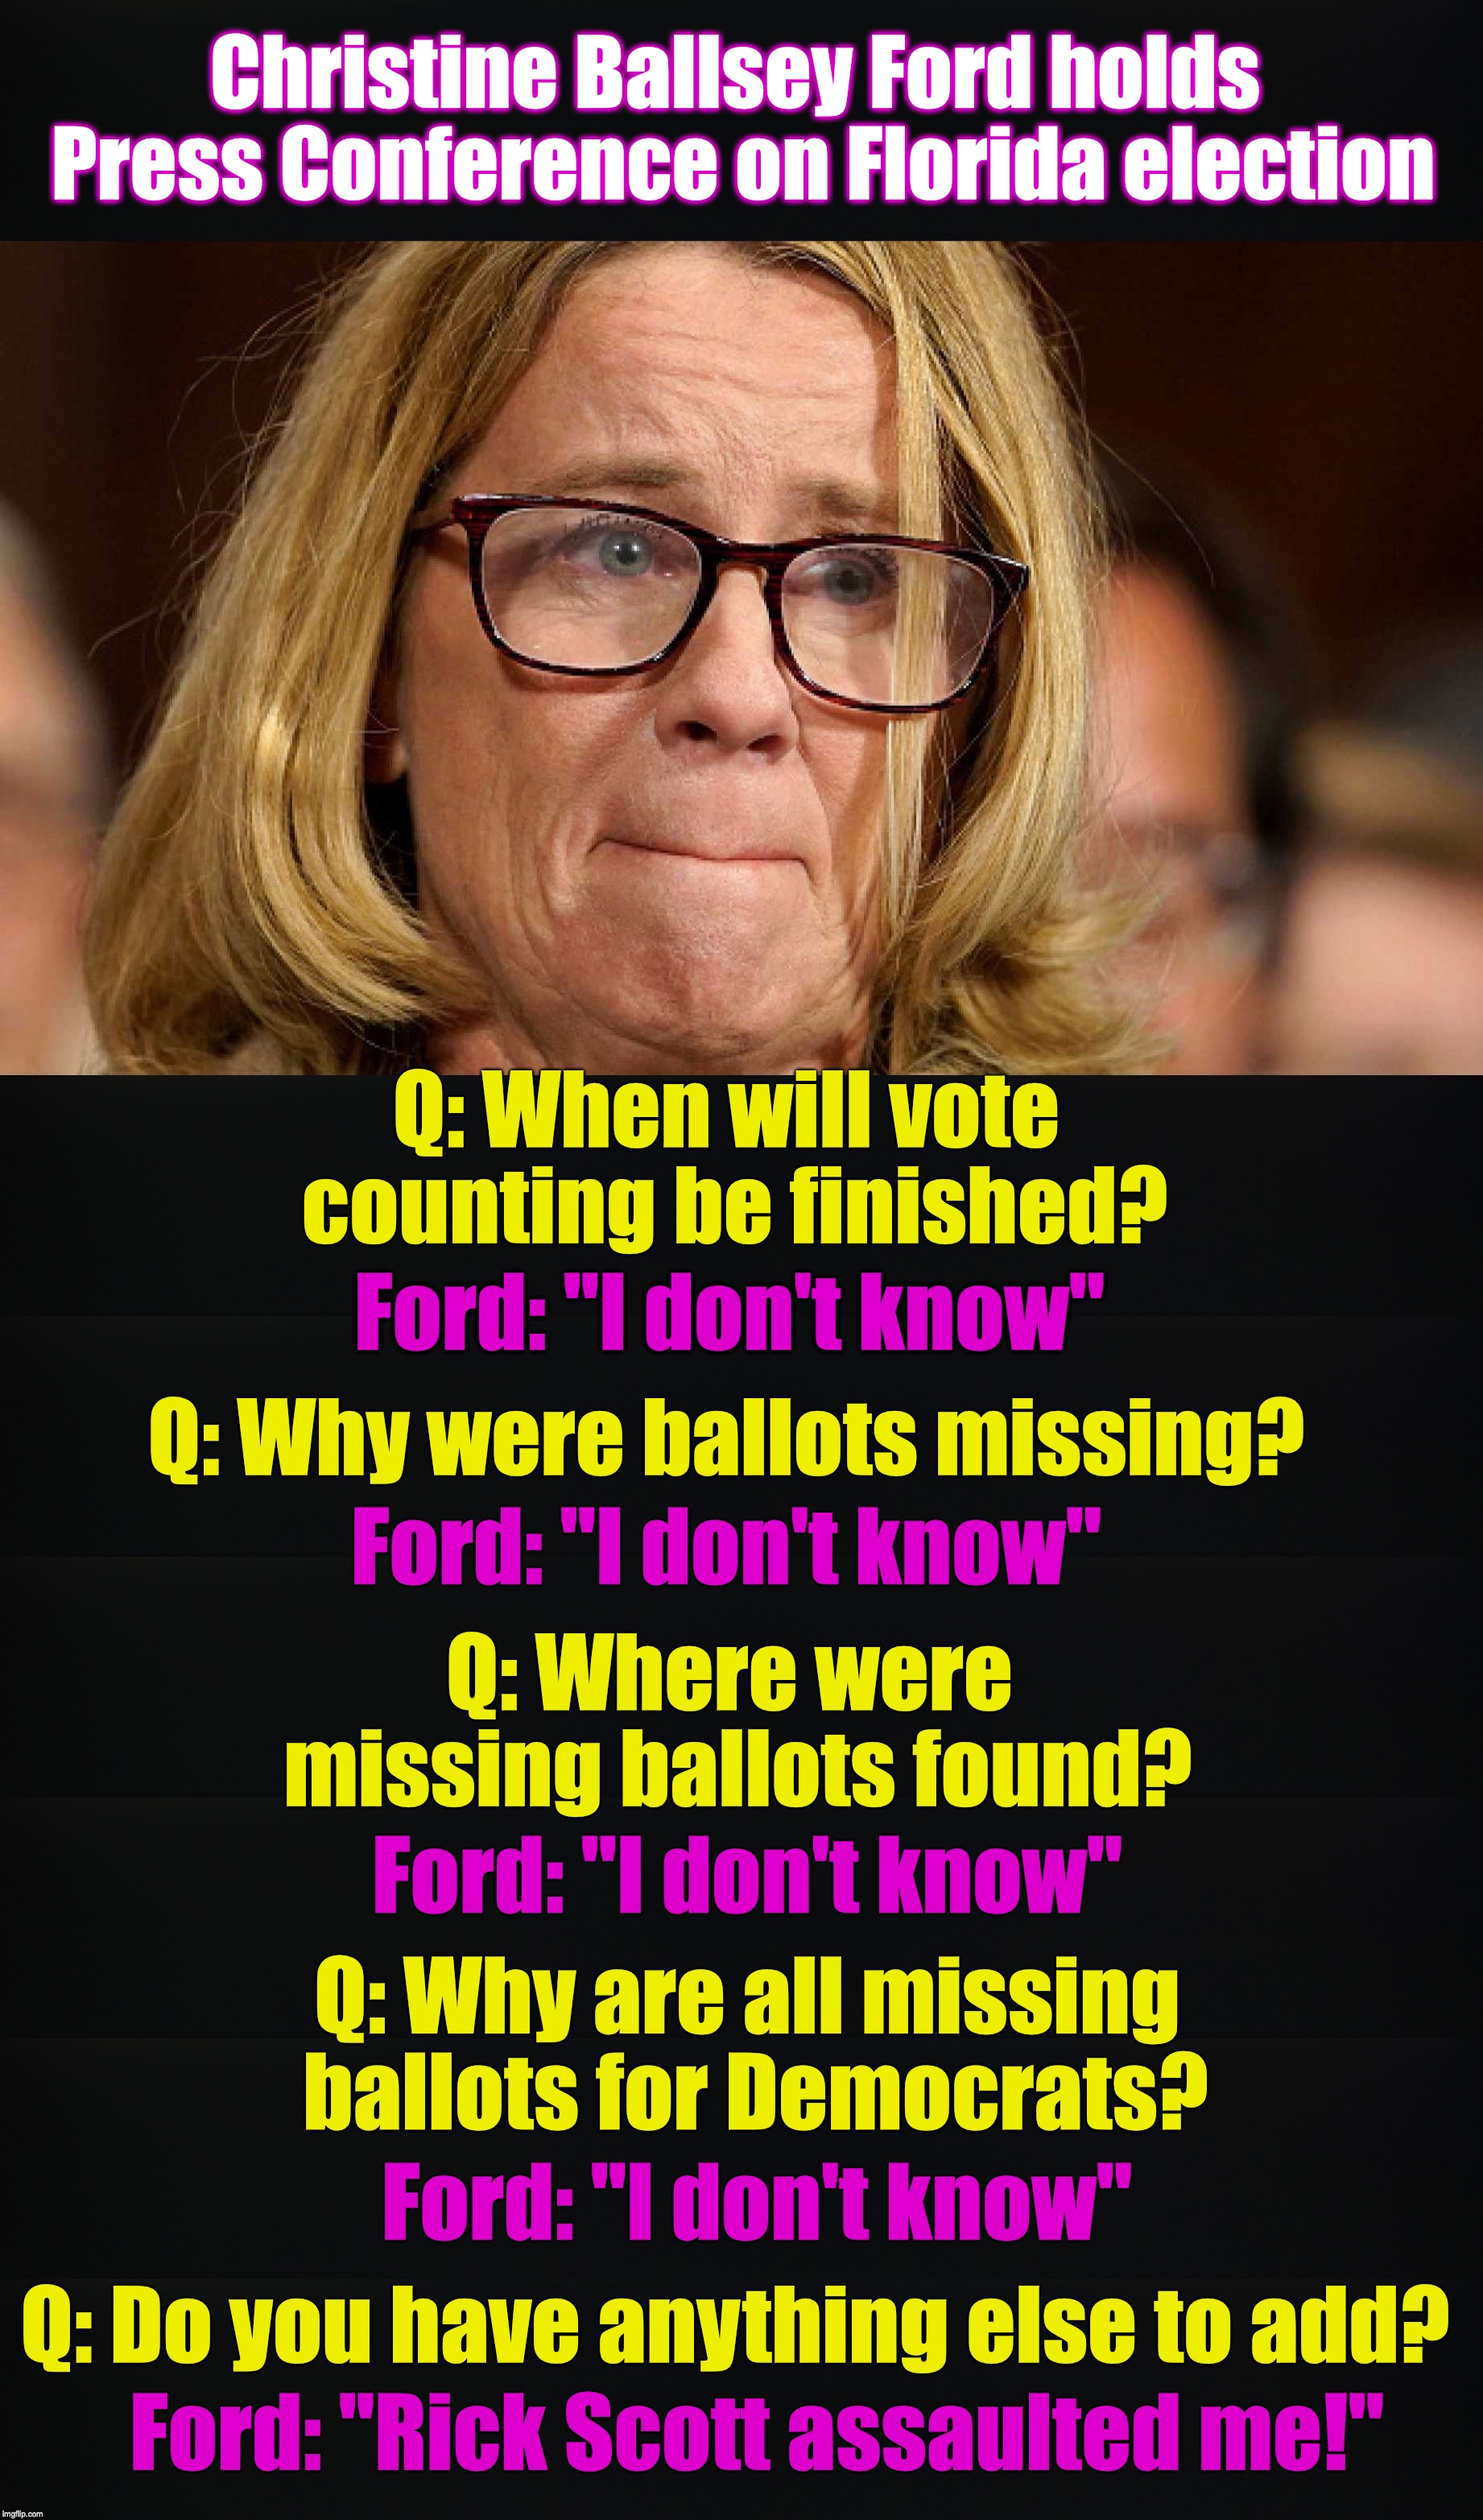 imagine what it would be like if they hired her for PR | Christine Ballsey Ford holds Press Conference on Florida election; Q: When will vote counting be finished? Ford: "I don't know"; Q: Why were ballots missing? Ford: "I don't know"; Q: Where were missing ballots found? Ford: "I don't know"; Q: Why are all missing ballots for Democrats? Ford: "I don't know"; Q: Do you have anything else to add? Ford: "Rick Scott assaulted me!" | image tagged in christine blasey ford,election fraud,florida | made w/ Imgflip meme maker